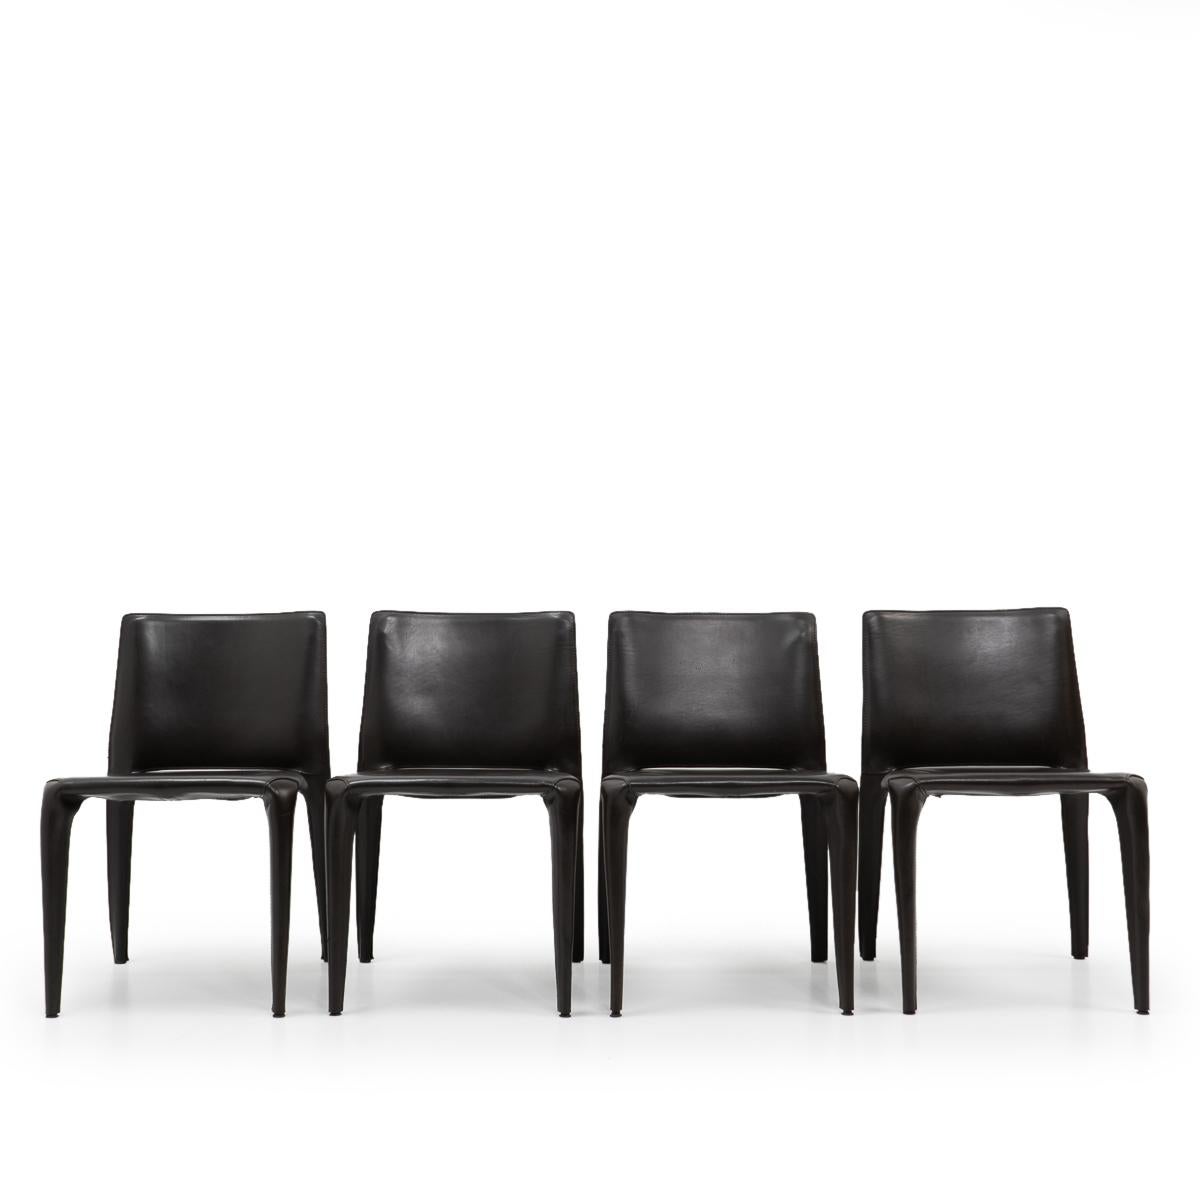 Set of four Bull dining chairs in dark BROWN leather by Mario Bellini for Cassina.

The Bull chair is built up as a tubular frame over which thick saddle leather is fitted; the leather skin is kept in place with zippers on the inside legs, very much